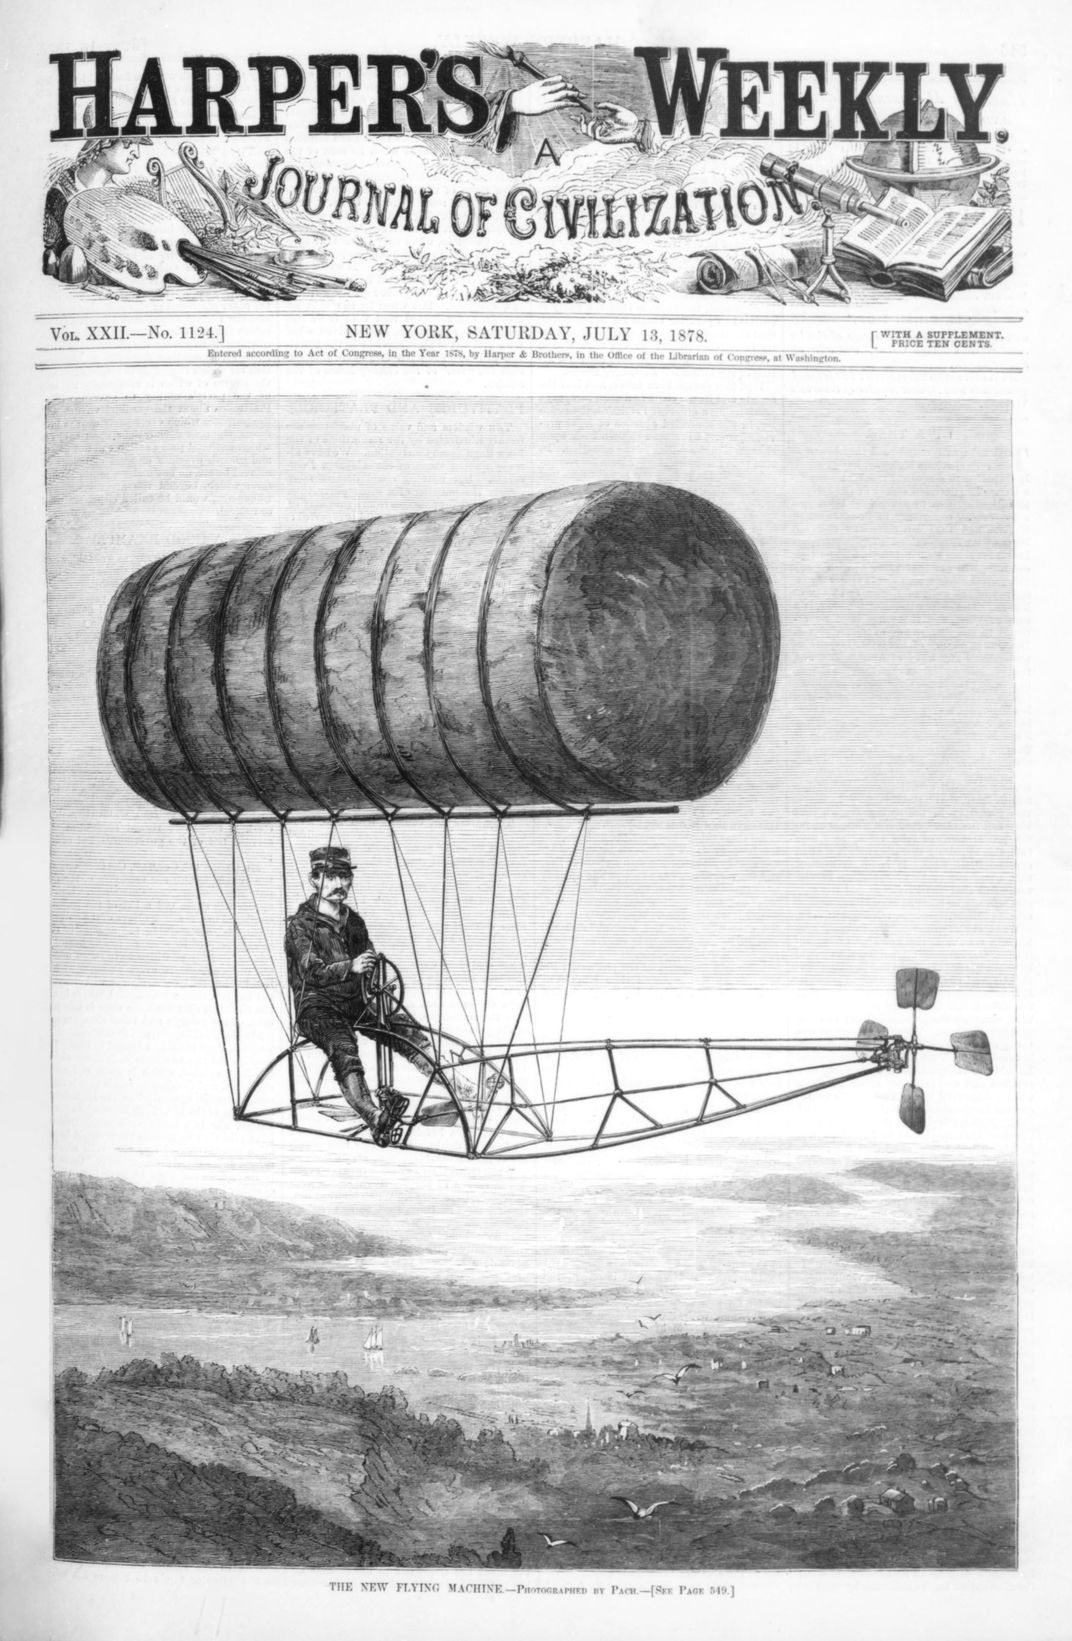 Ritchel's dirigible, as seen on the July 13, 1878, cover of Harper's Weekly​​​​​​​